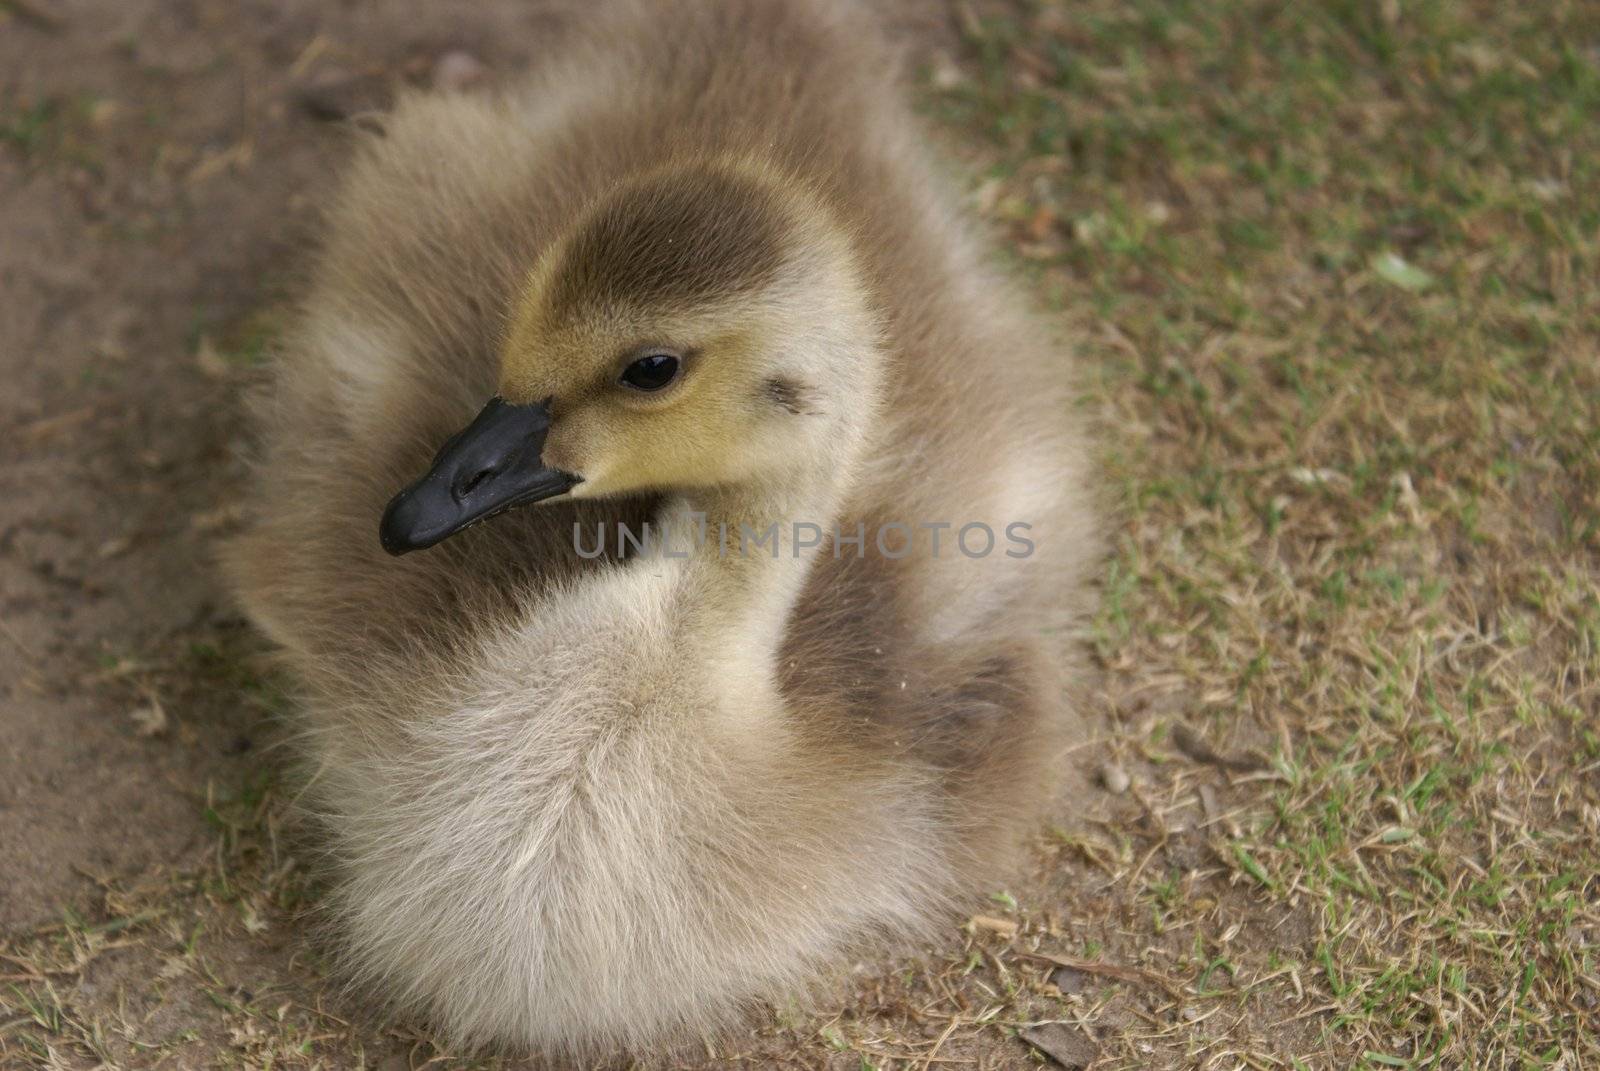 A baby Canadian Goose sitting on the grass.